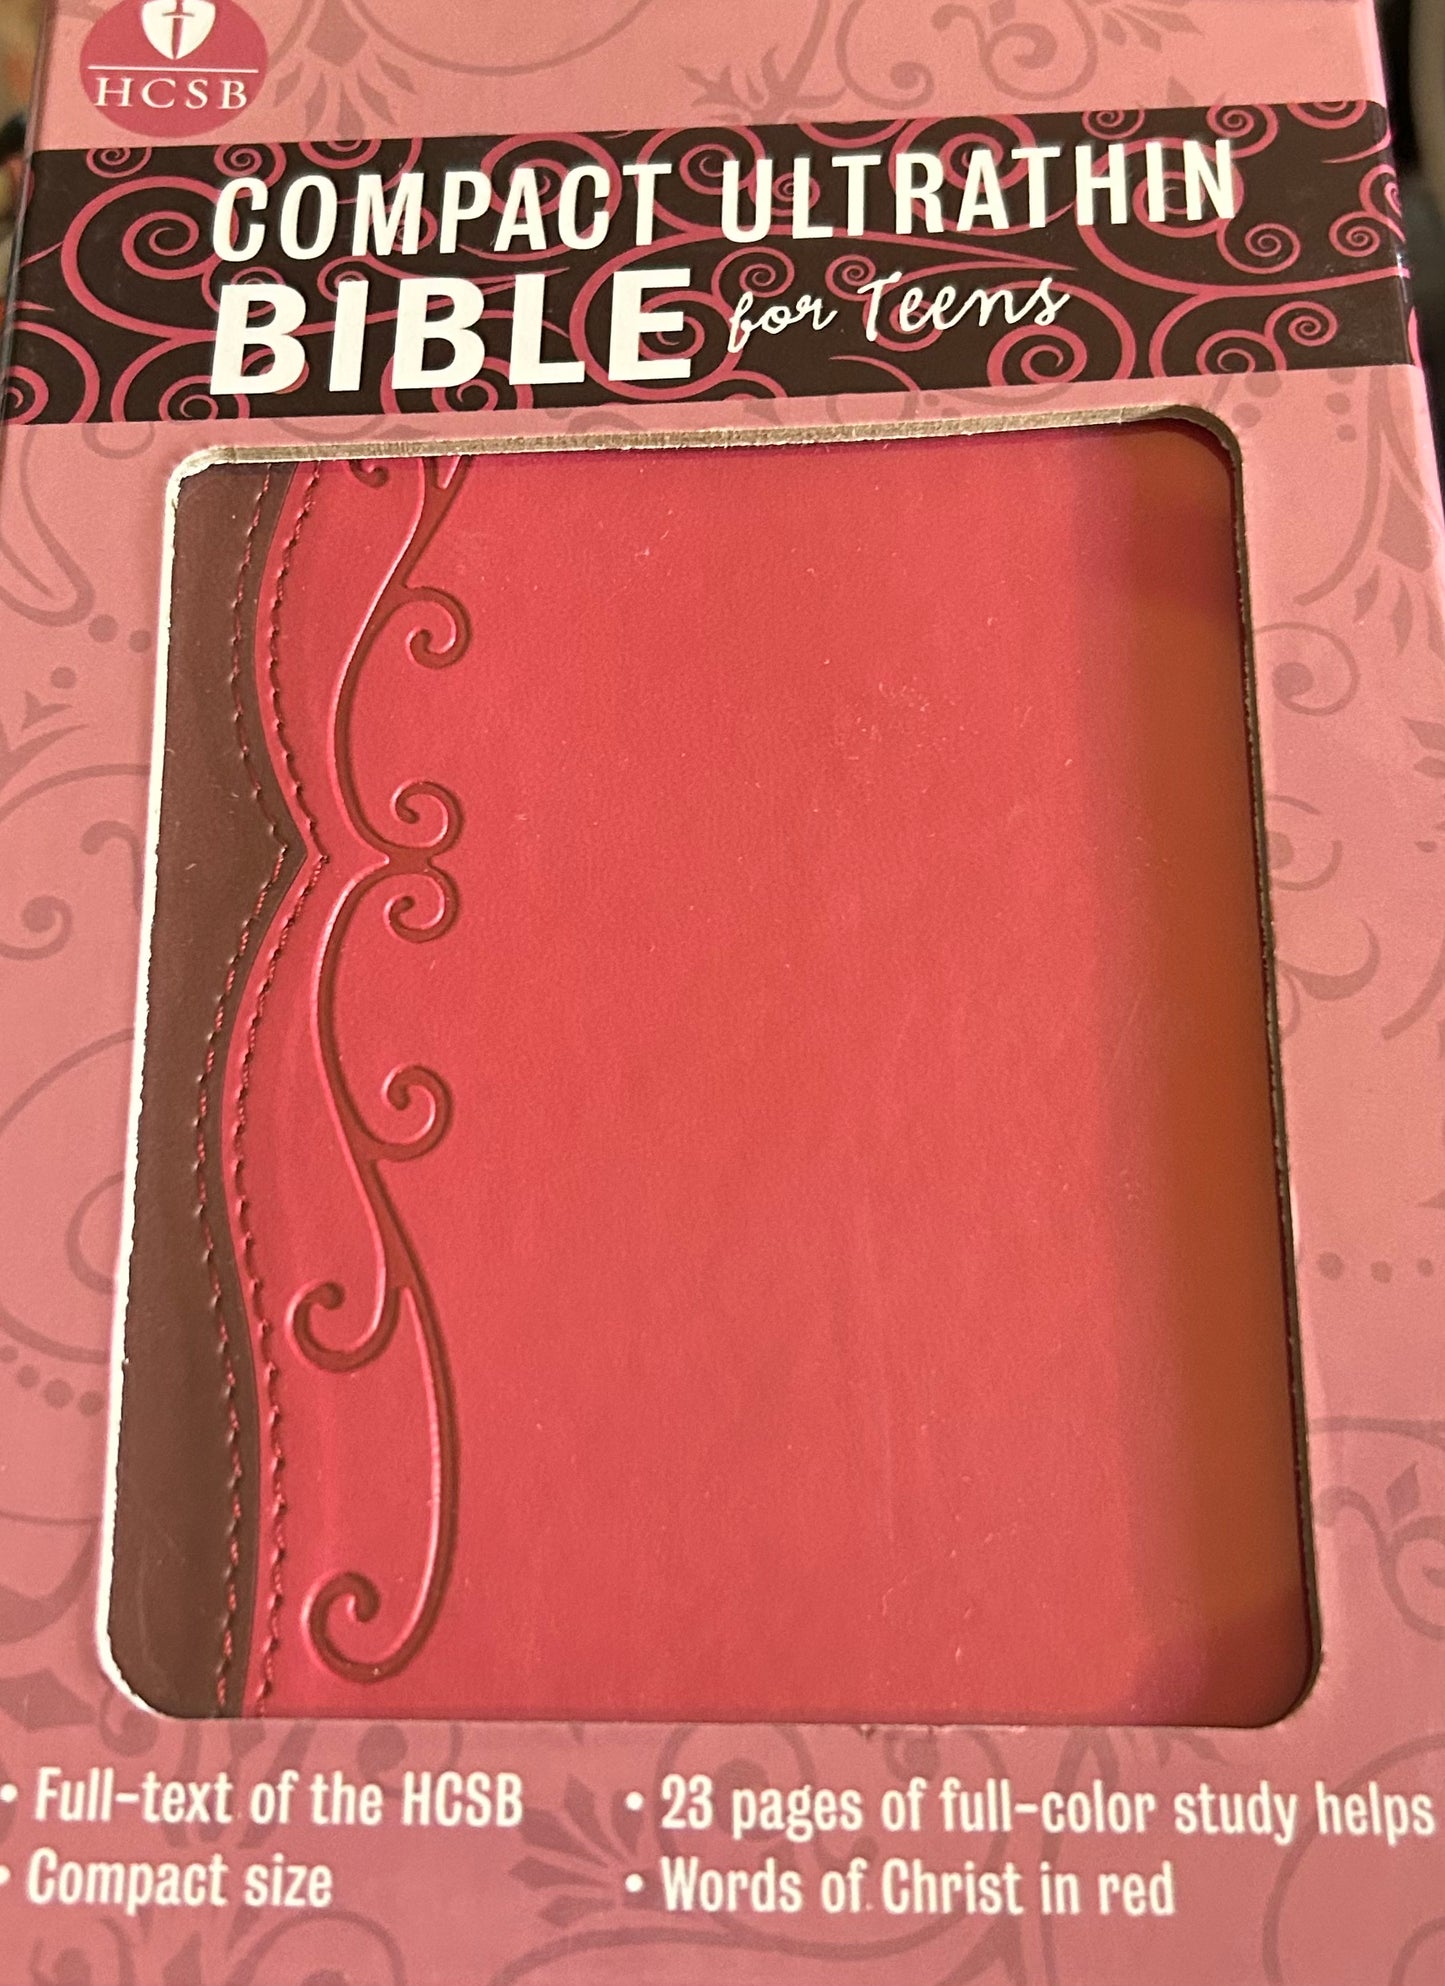 HCSB Compact Ultrathin Bible for Teens, Fuchsia LeatherTouch